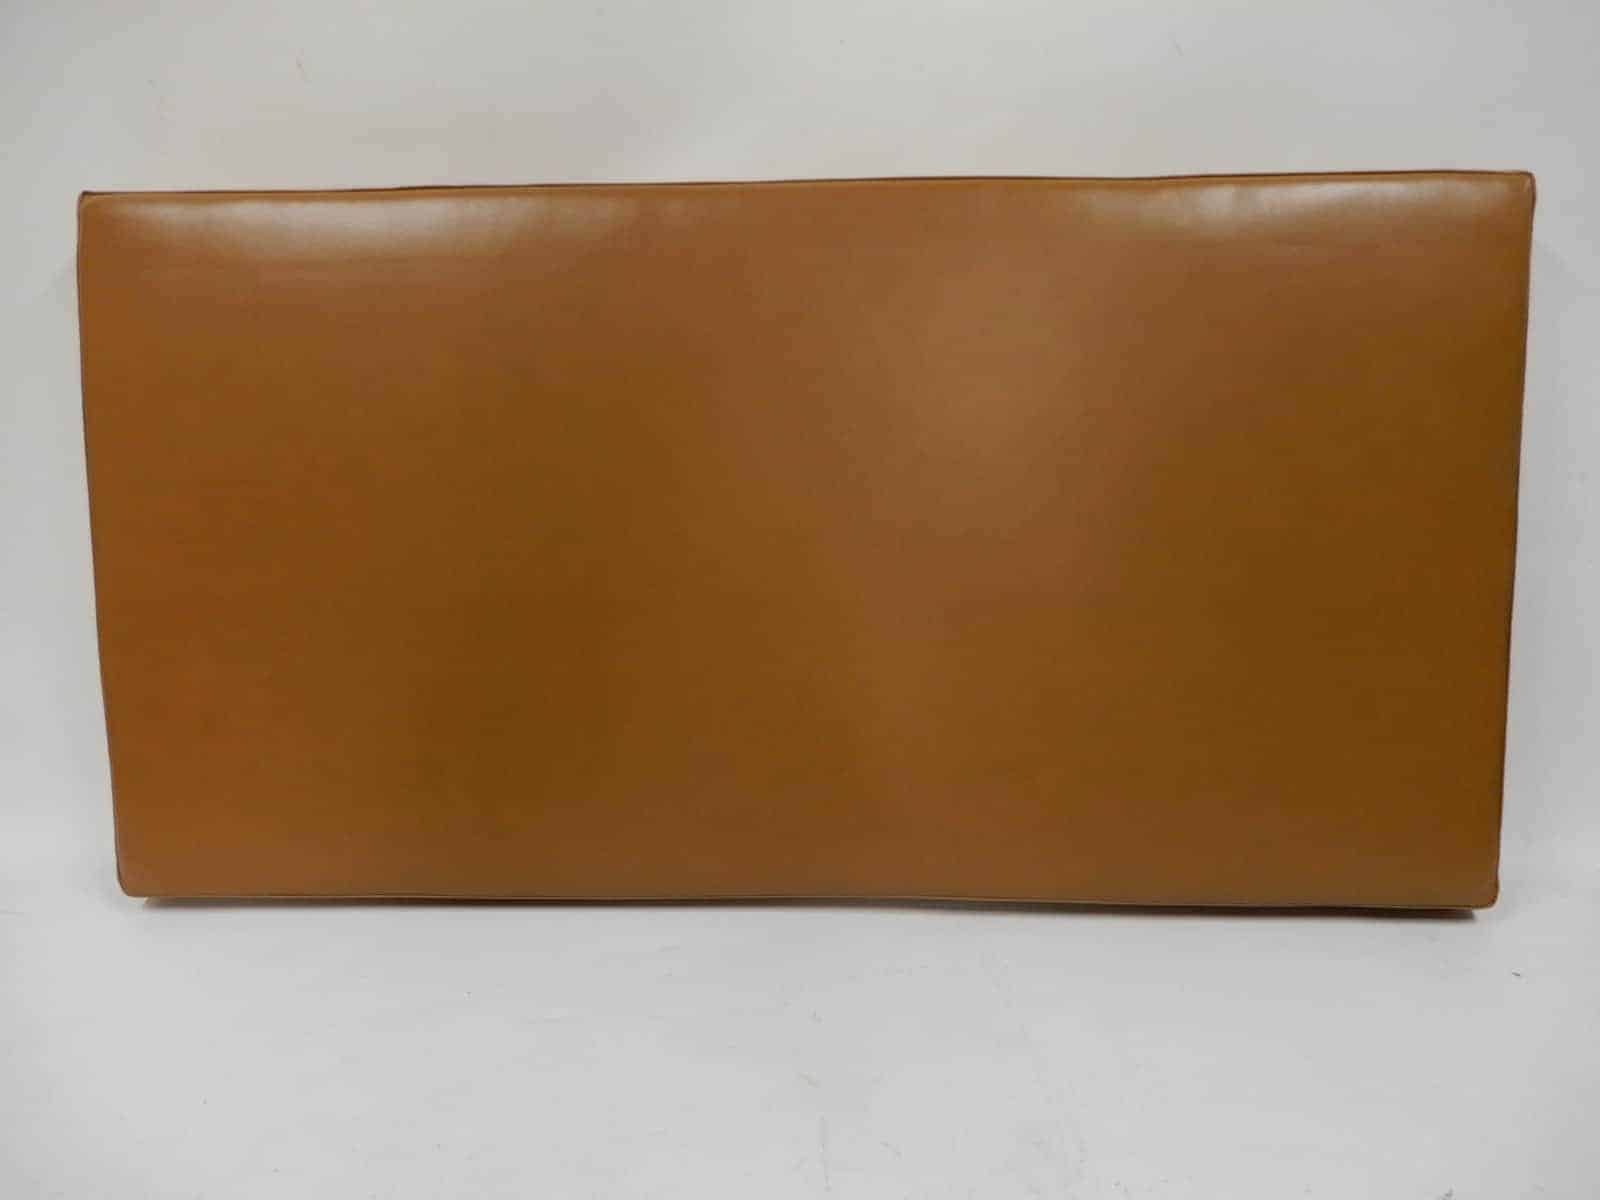 Bench Seat Cushion Tan Faux Leather, Faux Leather Bench Seat